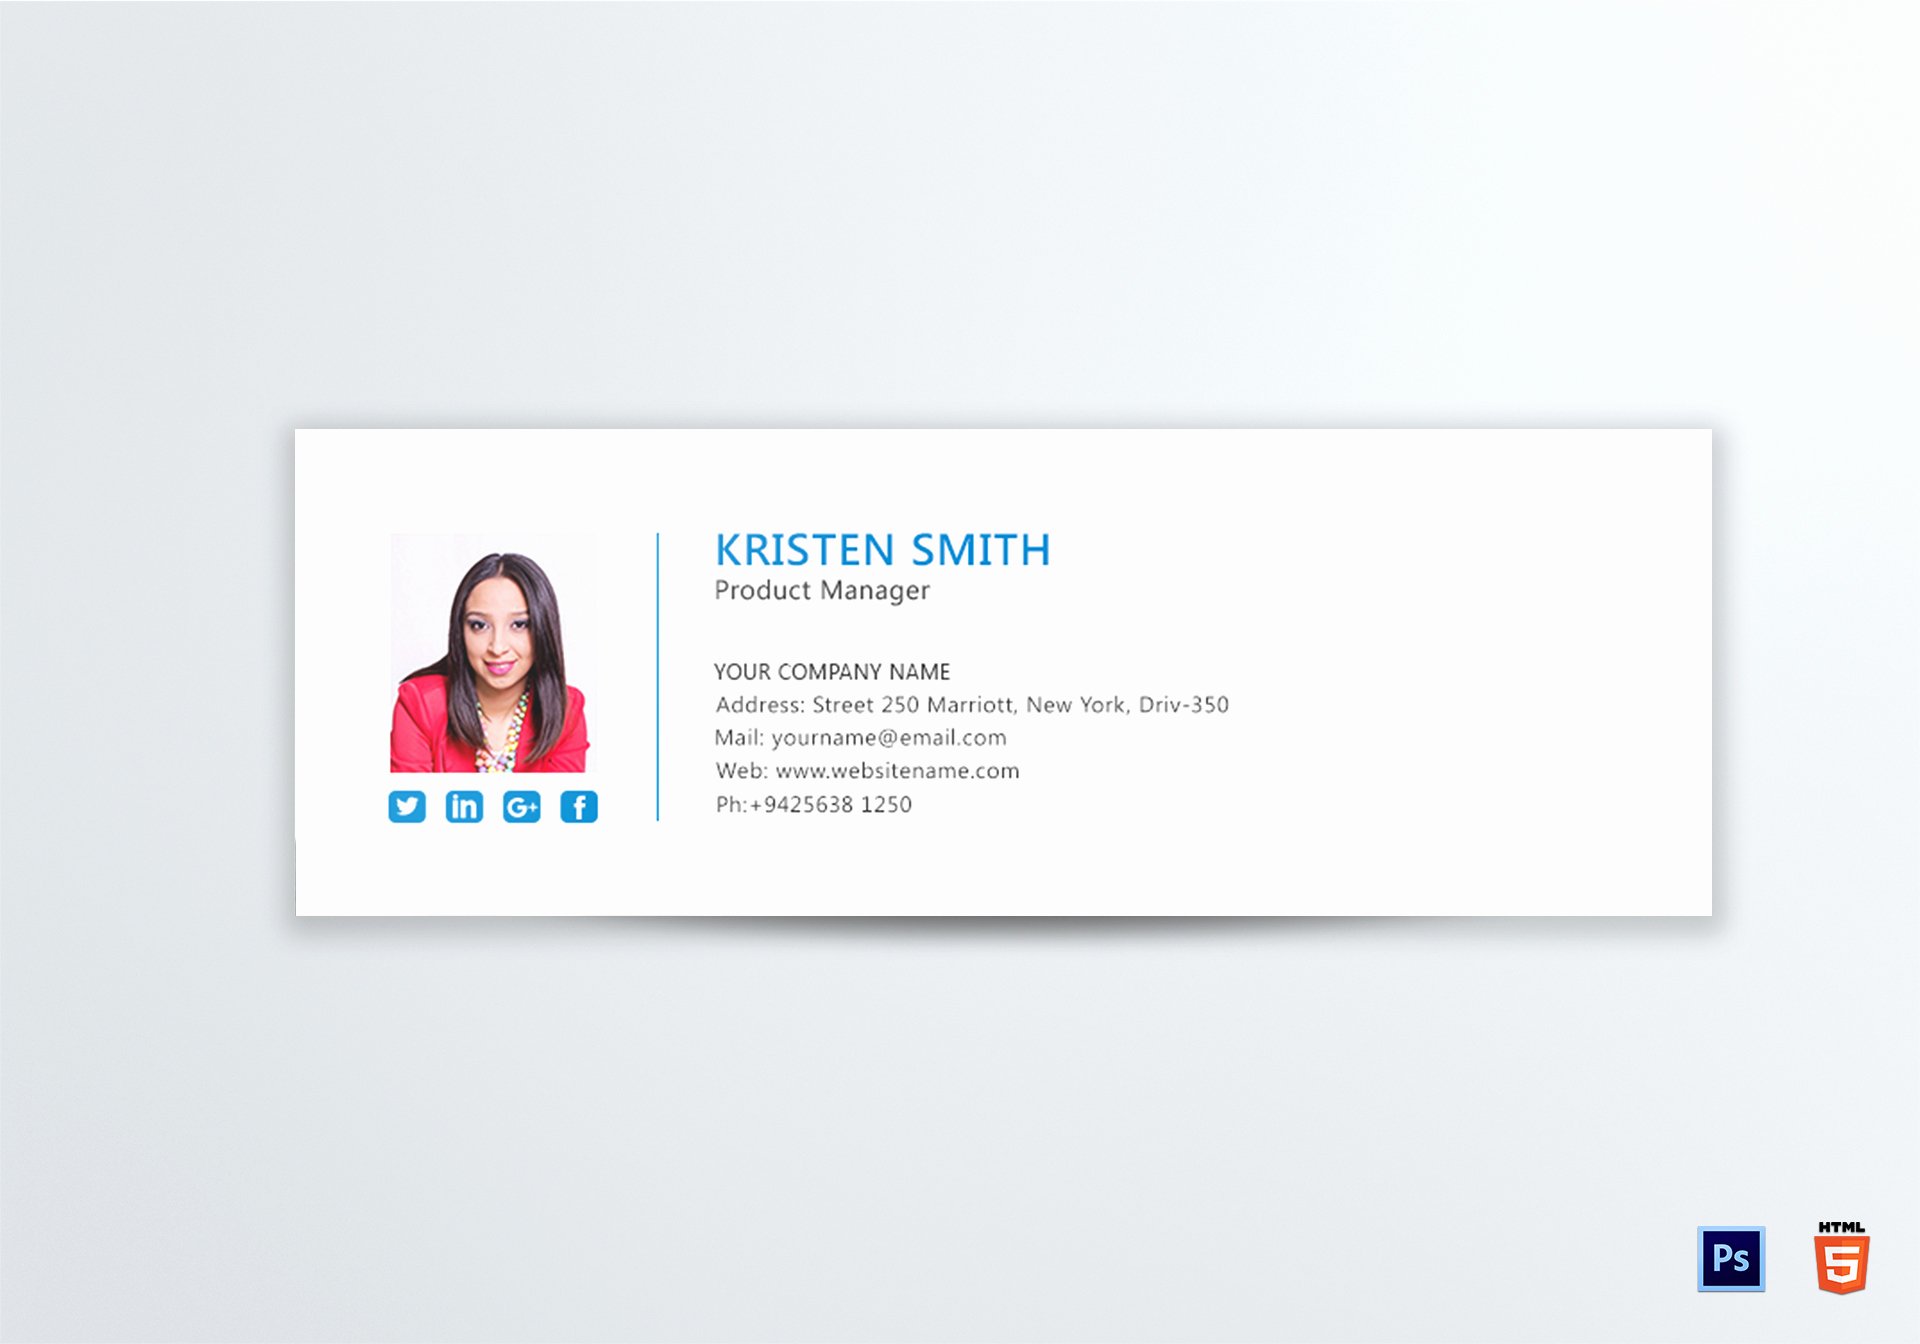 Professional Product Manager Email Signature Design